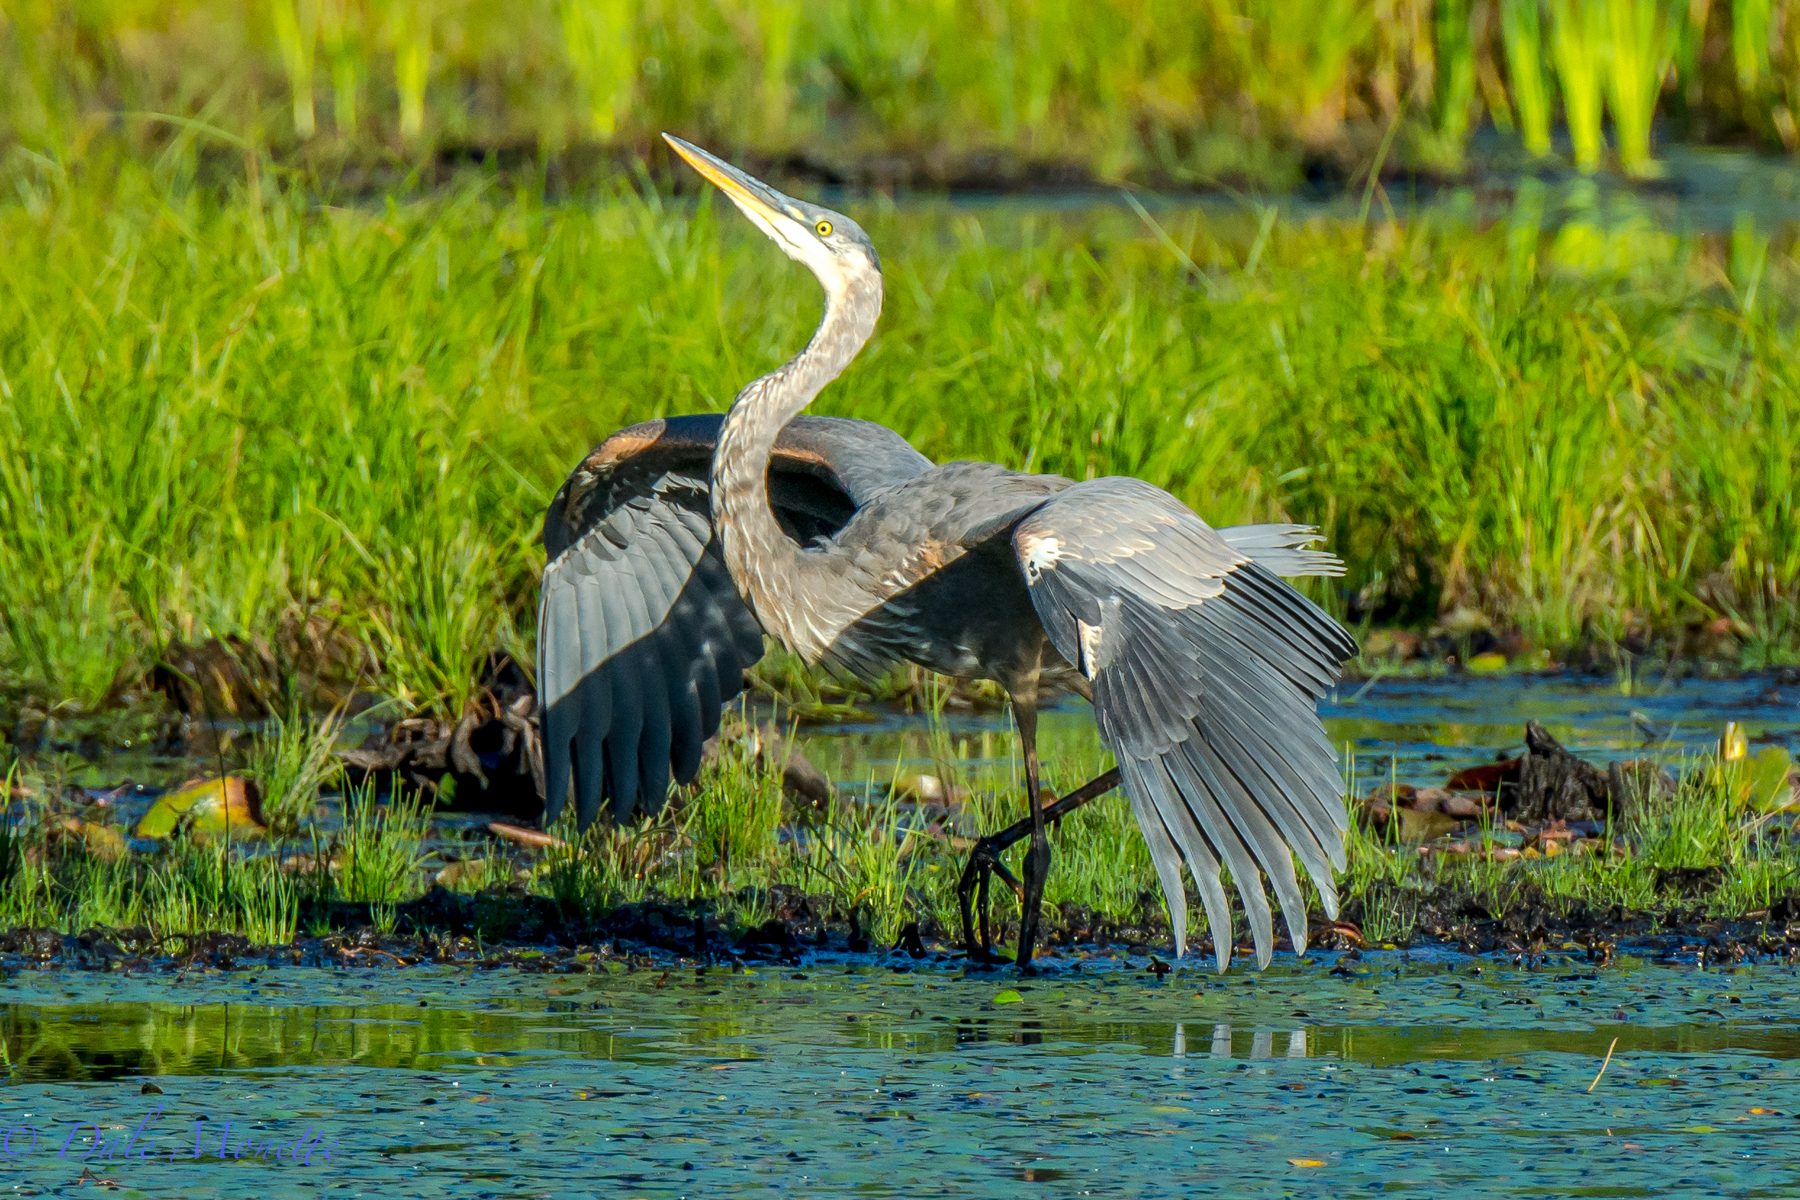   A young great blue heron puffs himself up to look bigger to another heron as he defends his fishing yards.  